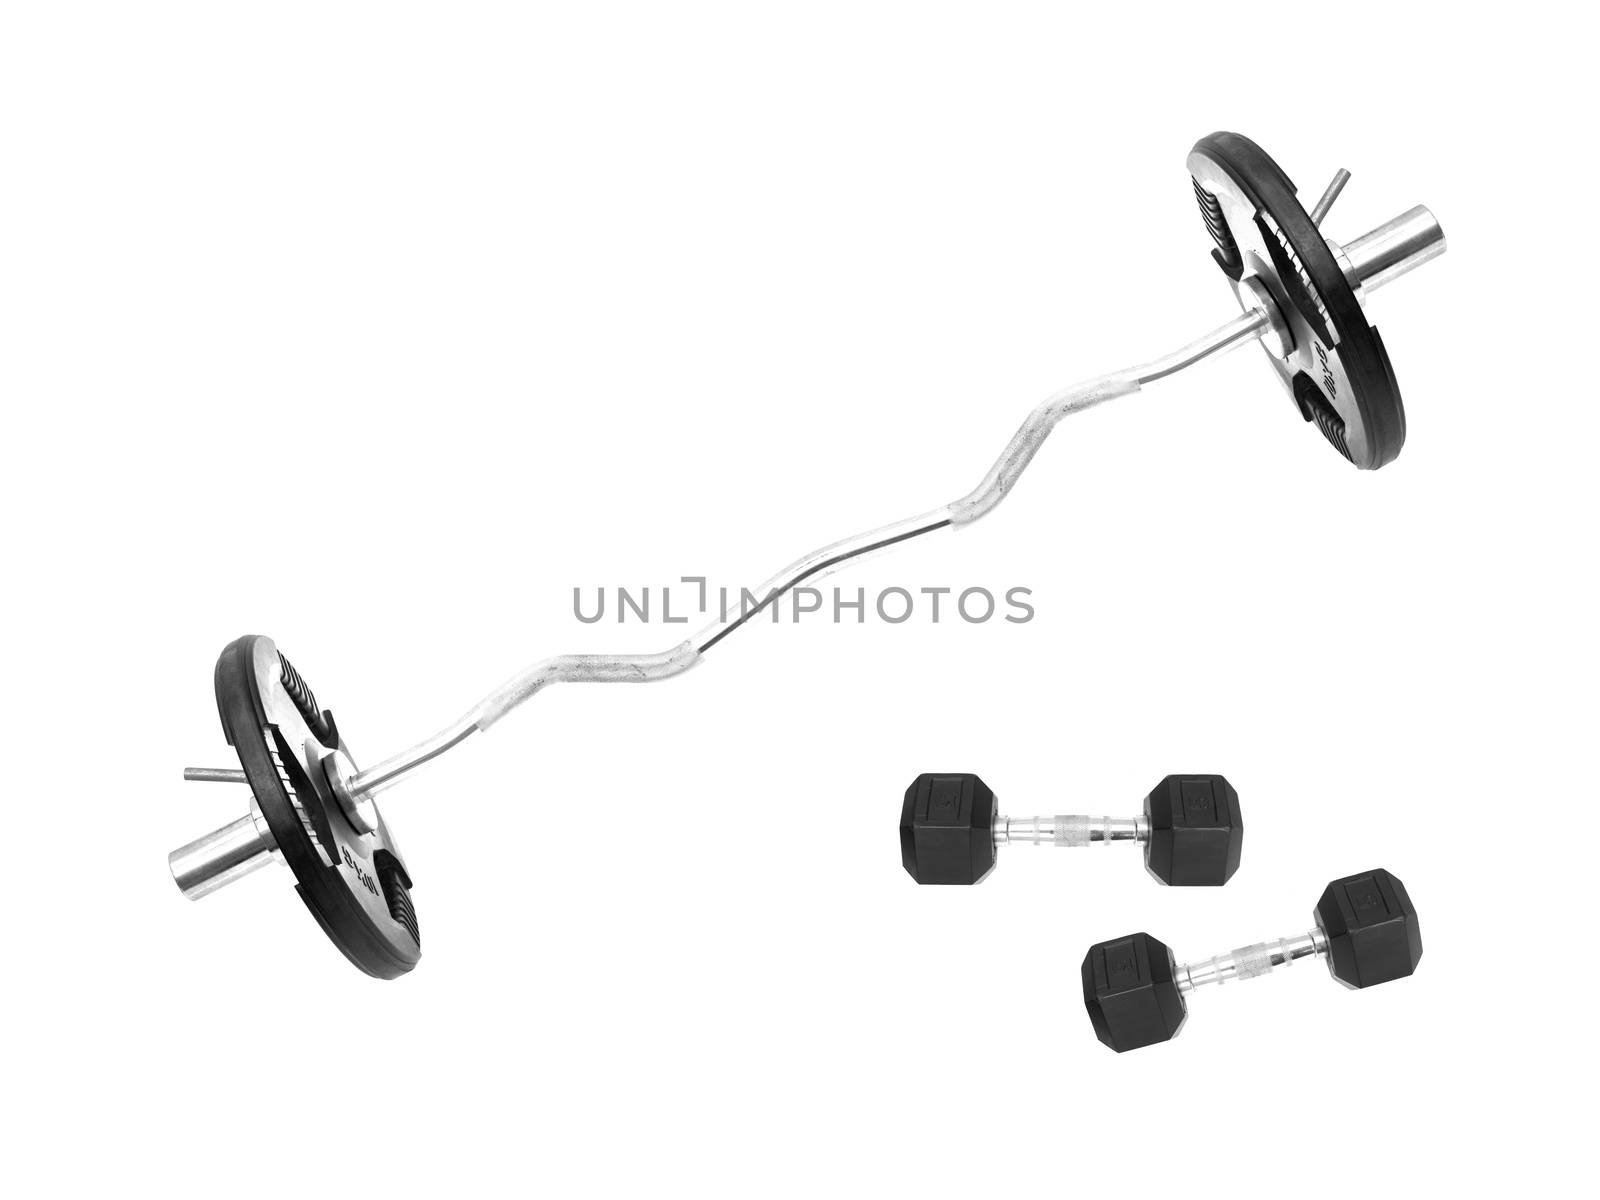 Gym weights isolated against a white background